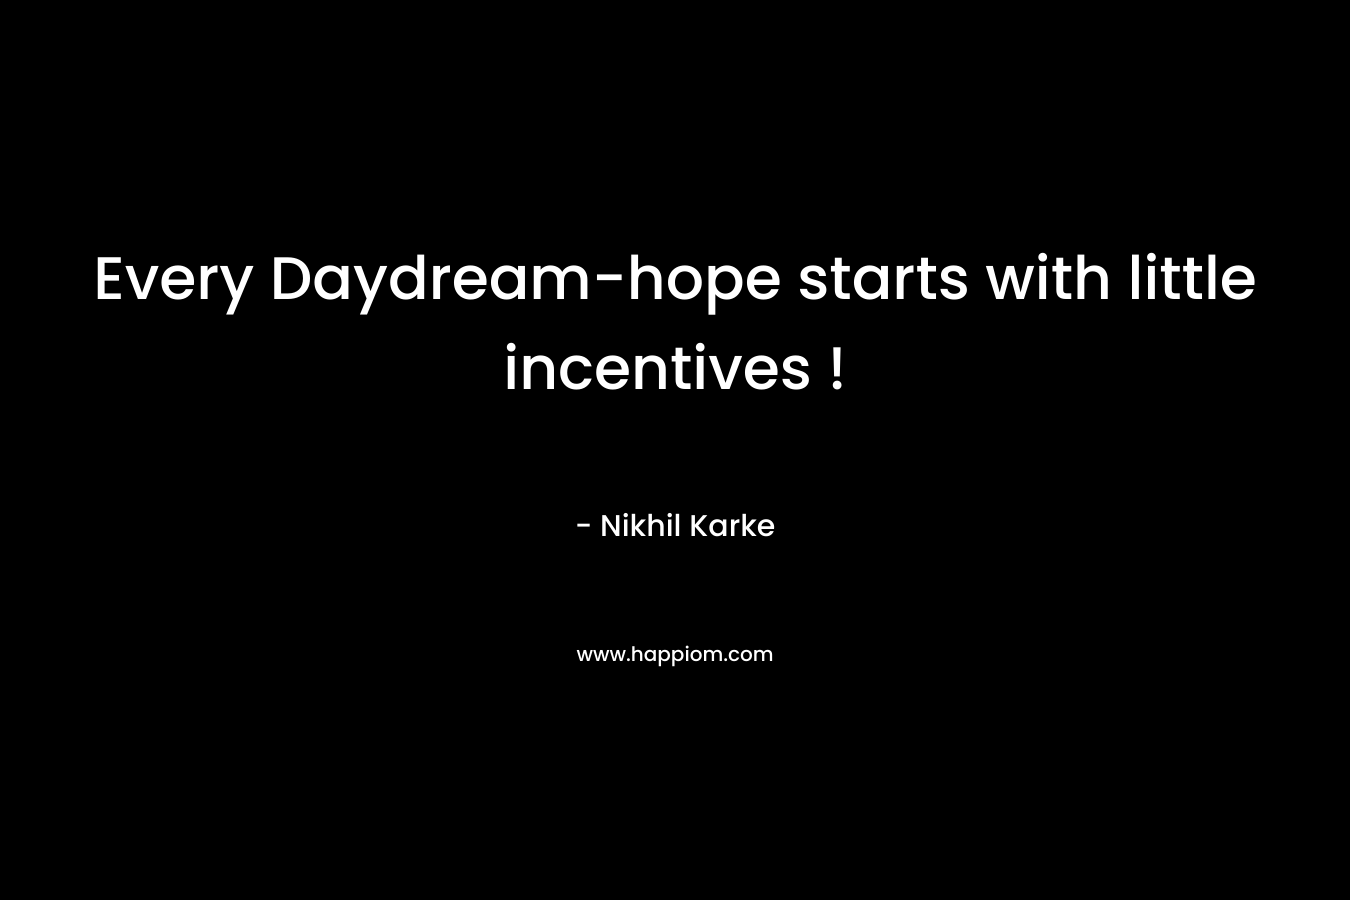 Every Daydream-hope starts with little incentives !